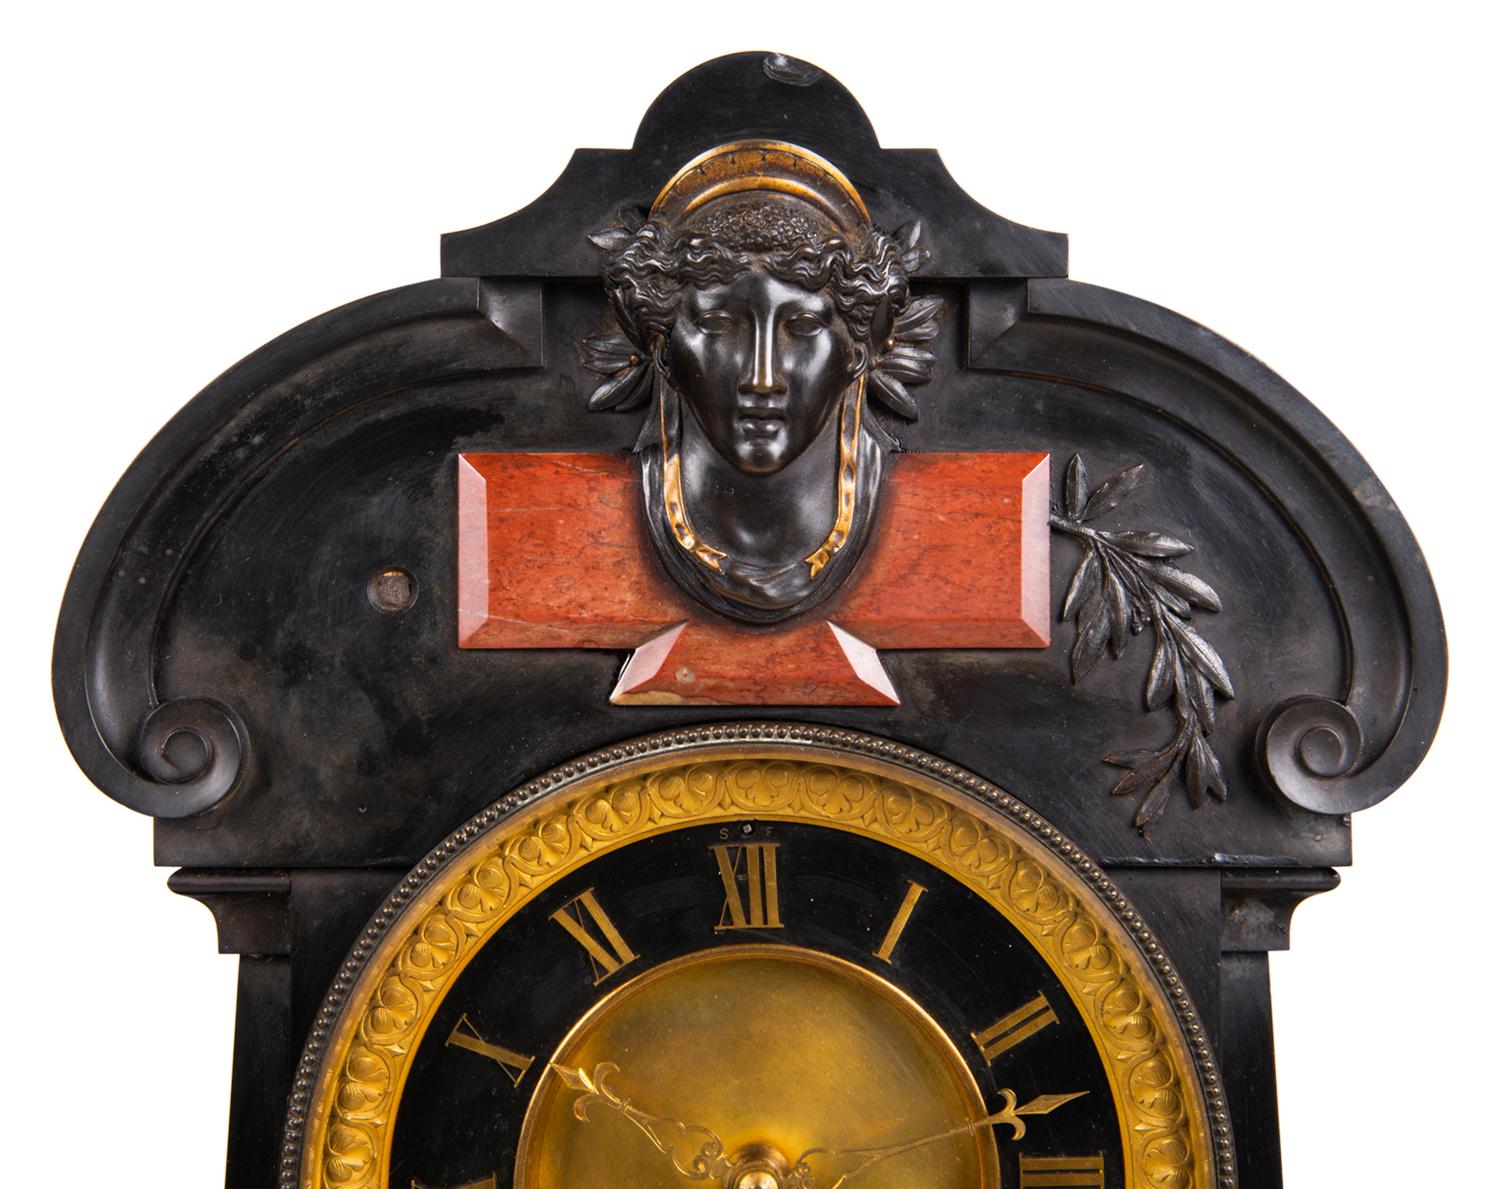 A very impressive 19th century Belgium black marble mantel clock with a clock, barometer and moon phase calendar, having classical scrolling decoration to the marble case, with inset rouge marble panels, a bronze mask and cherub holding a flame.